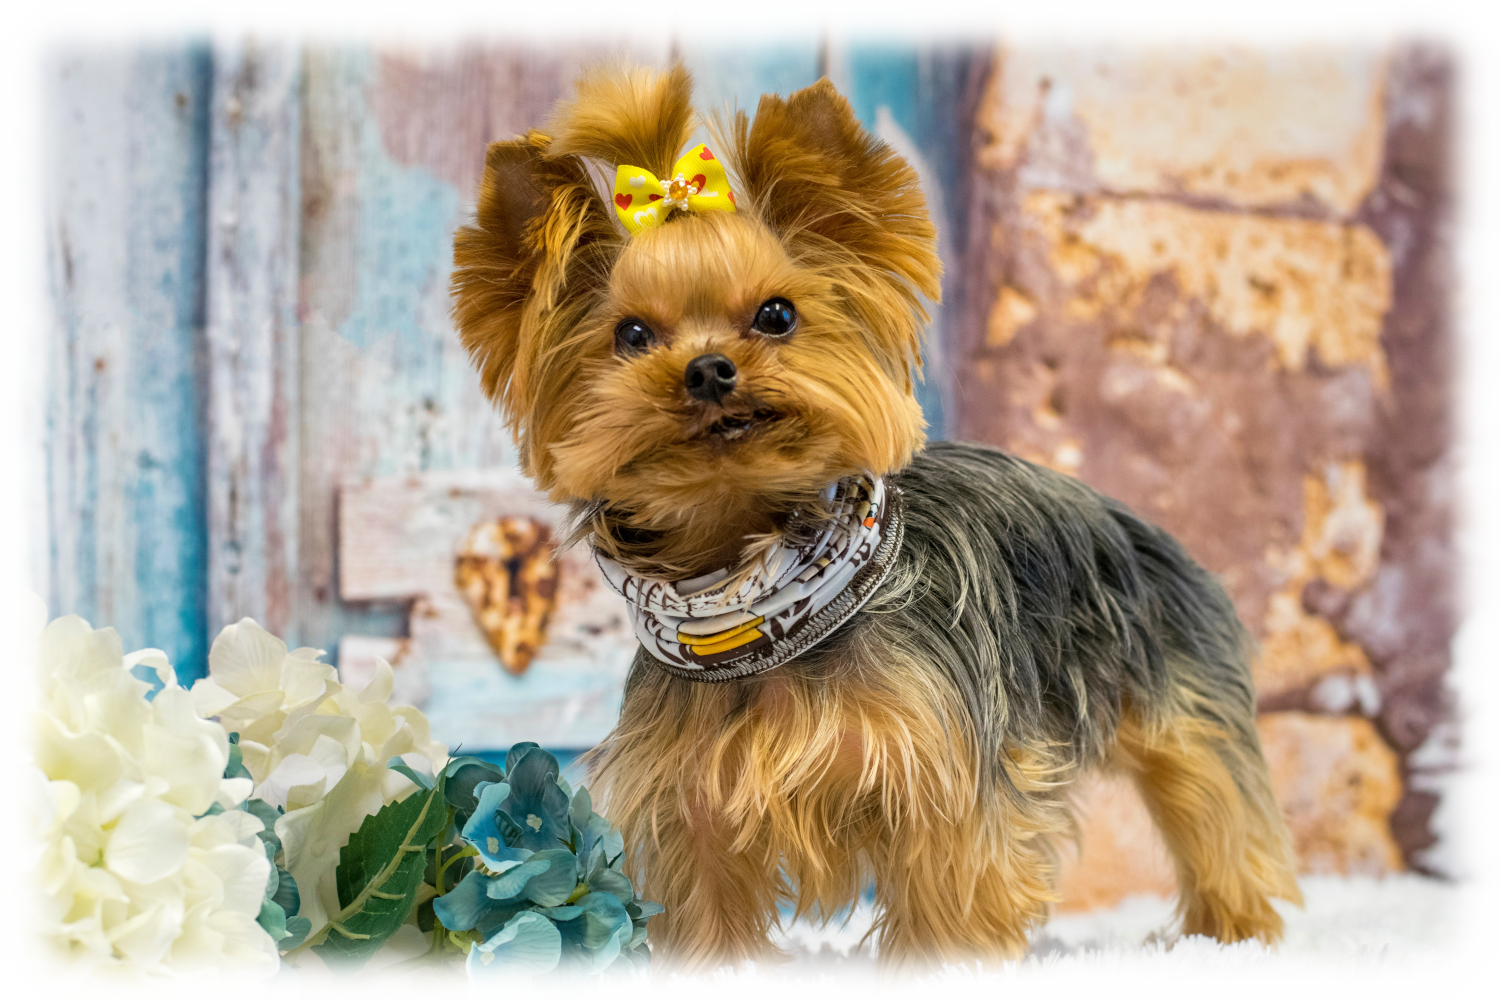 A cute male Yorkshire Terrier with a long coat, posing for the camera.